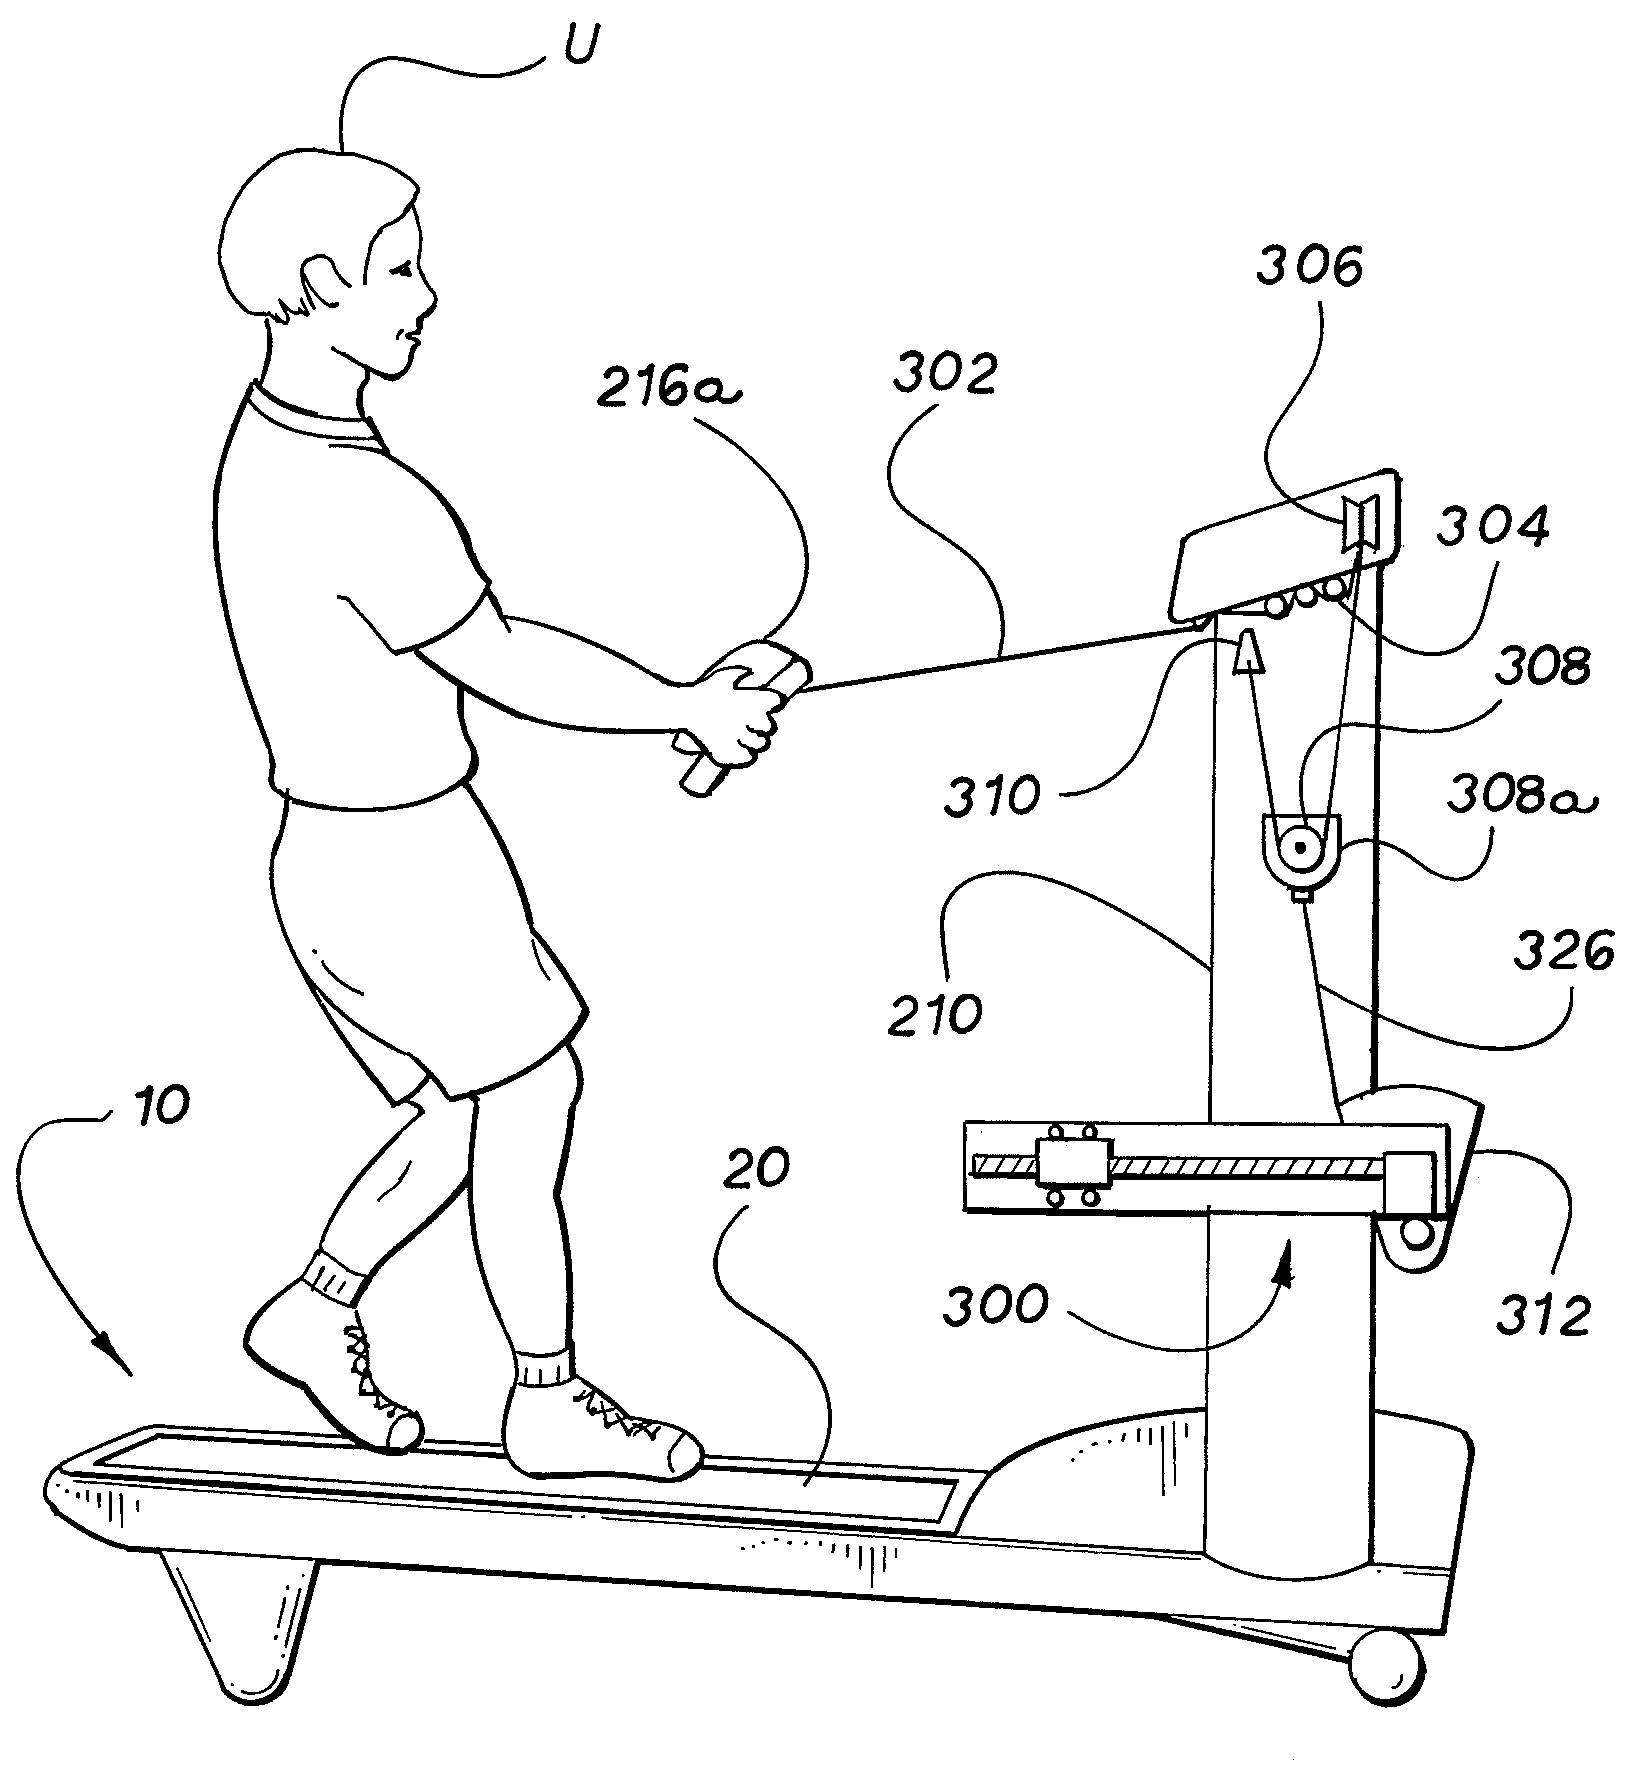 Dual direction exercise treadmill for simulating a dragging or pulling action with a user adjustable constant static weight resistance